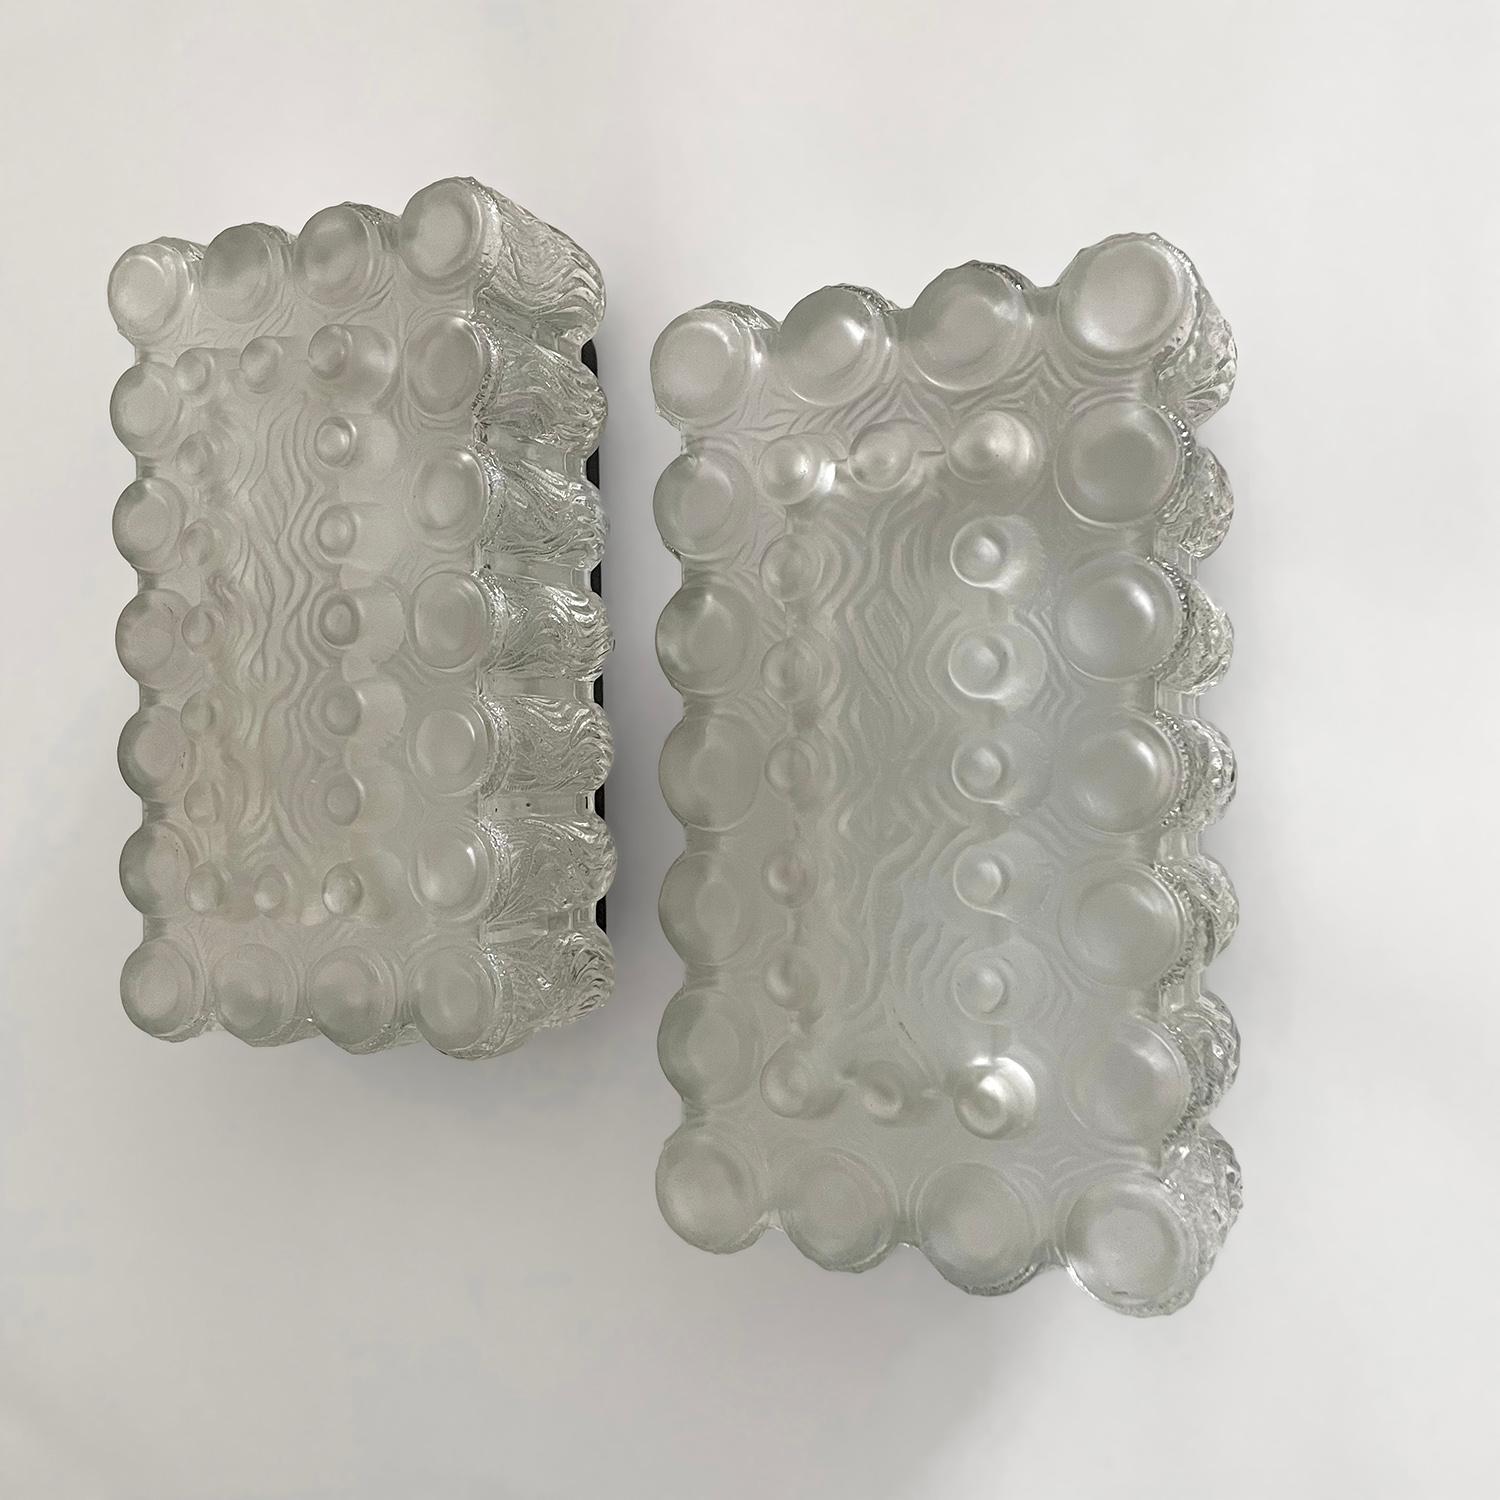 Limburg textured ice glass bubble sconces
Germany, circa 1960’s
Beautifully molded contrasting glass shades illuminate light beautifully 
The front part of each glass shade is crafted from textured frosted glass and the sides are comprised of